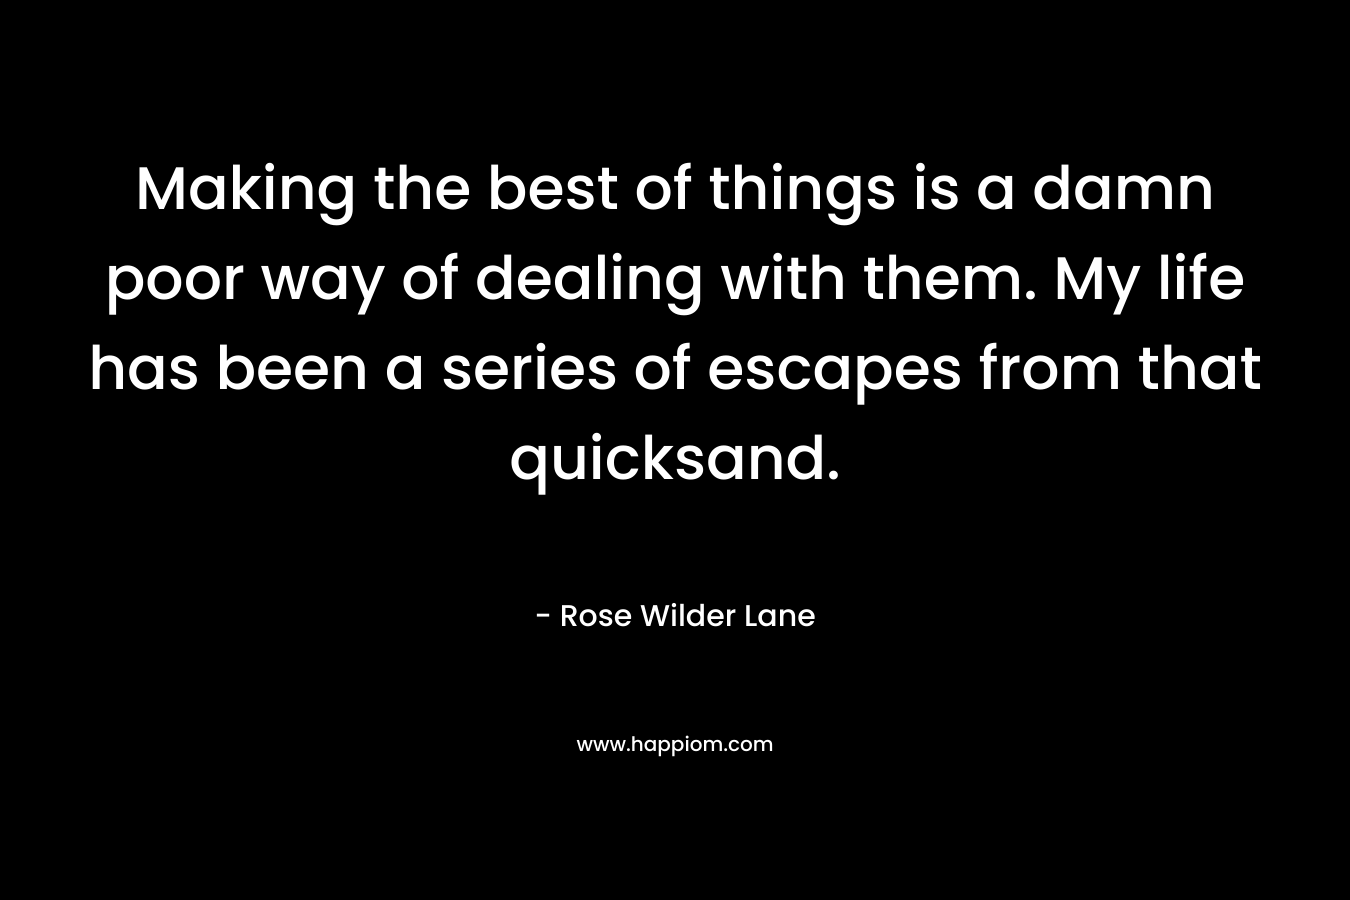 Making the best of things is a damn poor way of dealing with them. My life has been a series of escapes from that quicksand.